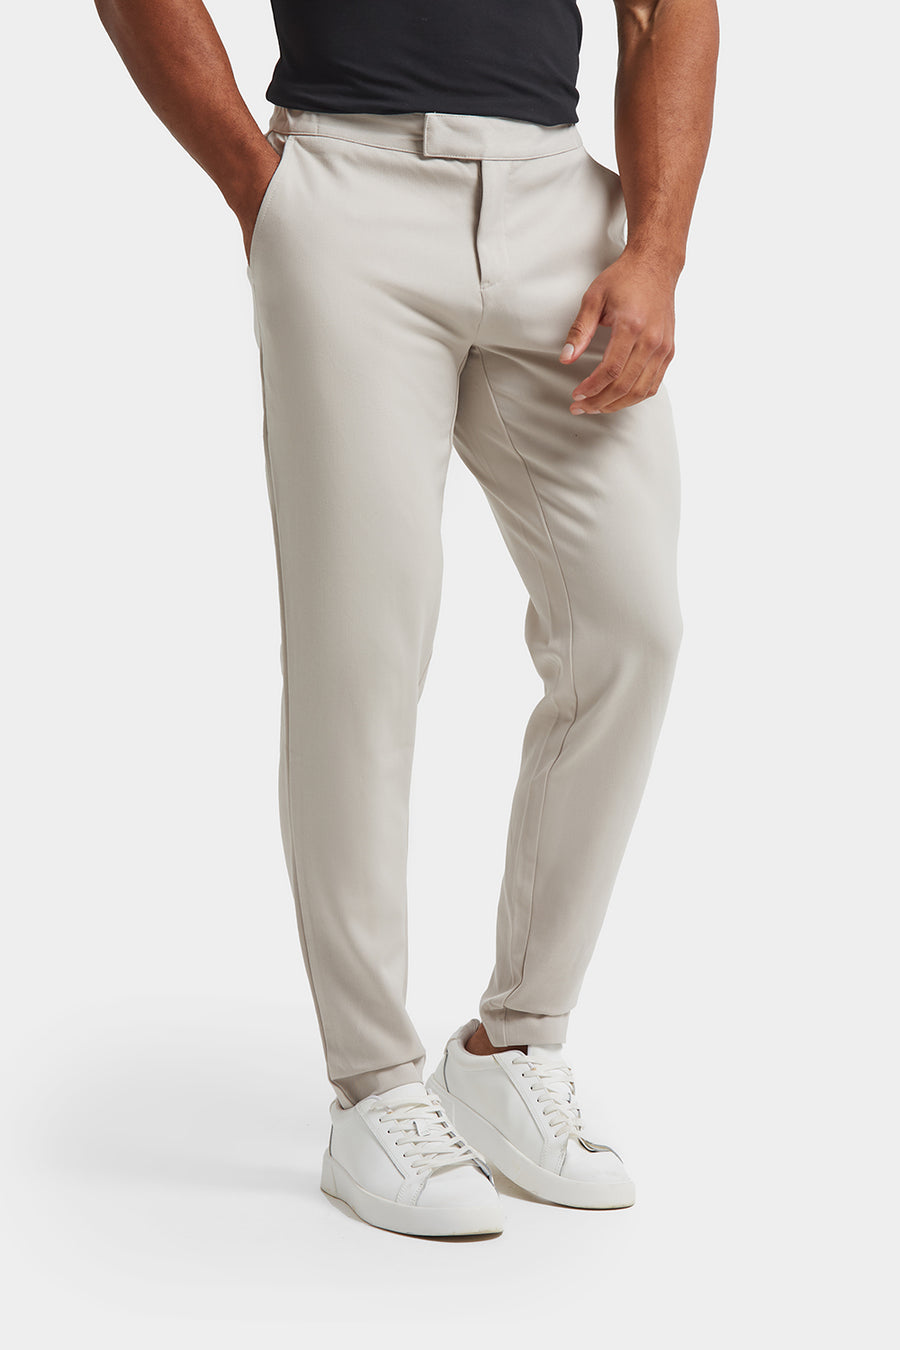 Athletic Fit Pants - Tailored Athlete - TAILORED ATHLETE - USA